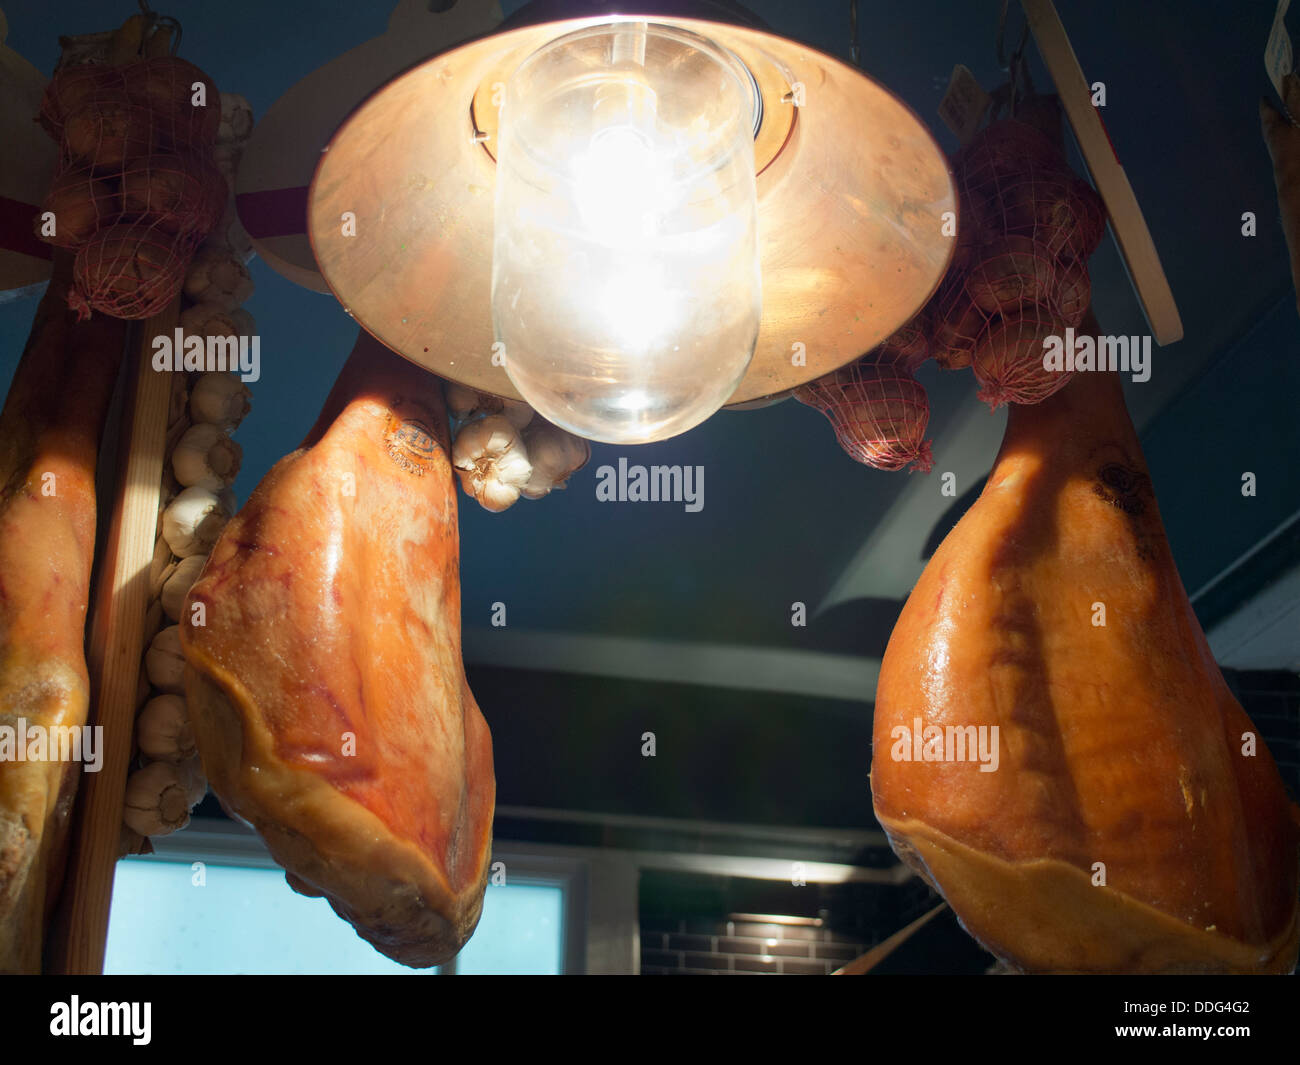 Suspended hams in an Italian Restaurant in Oxford, England 5 Stock Photo